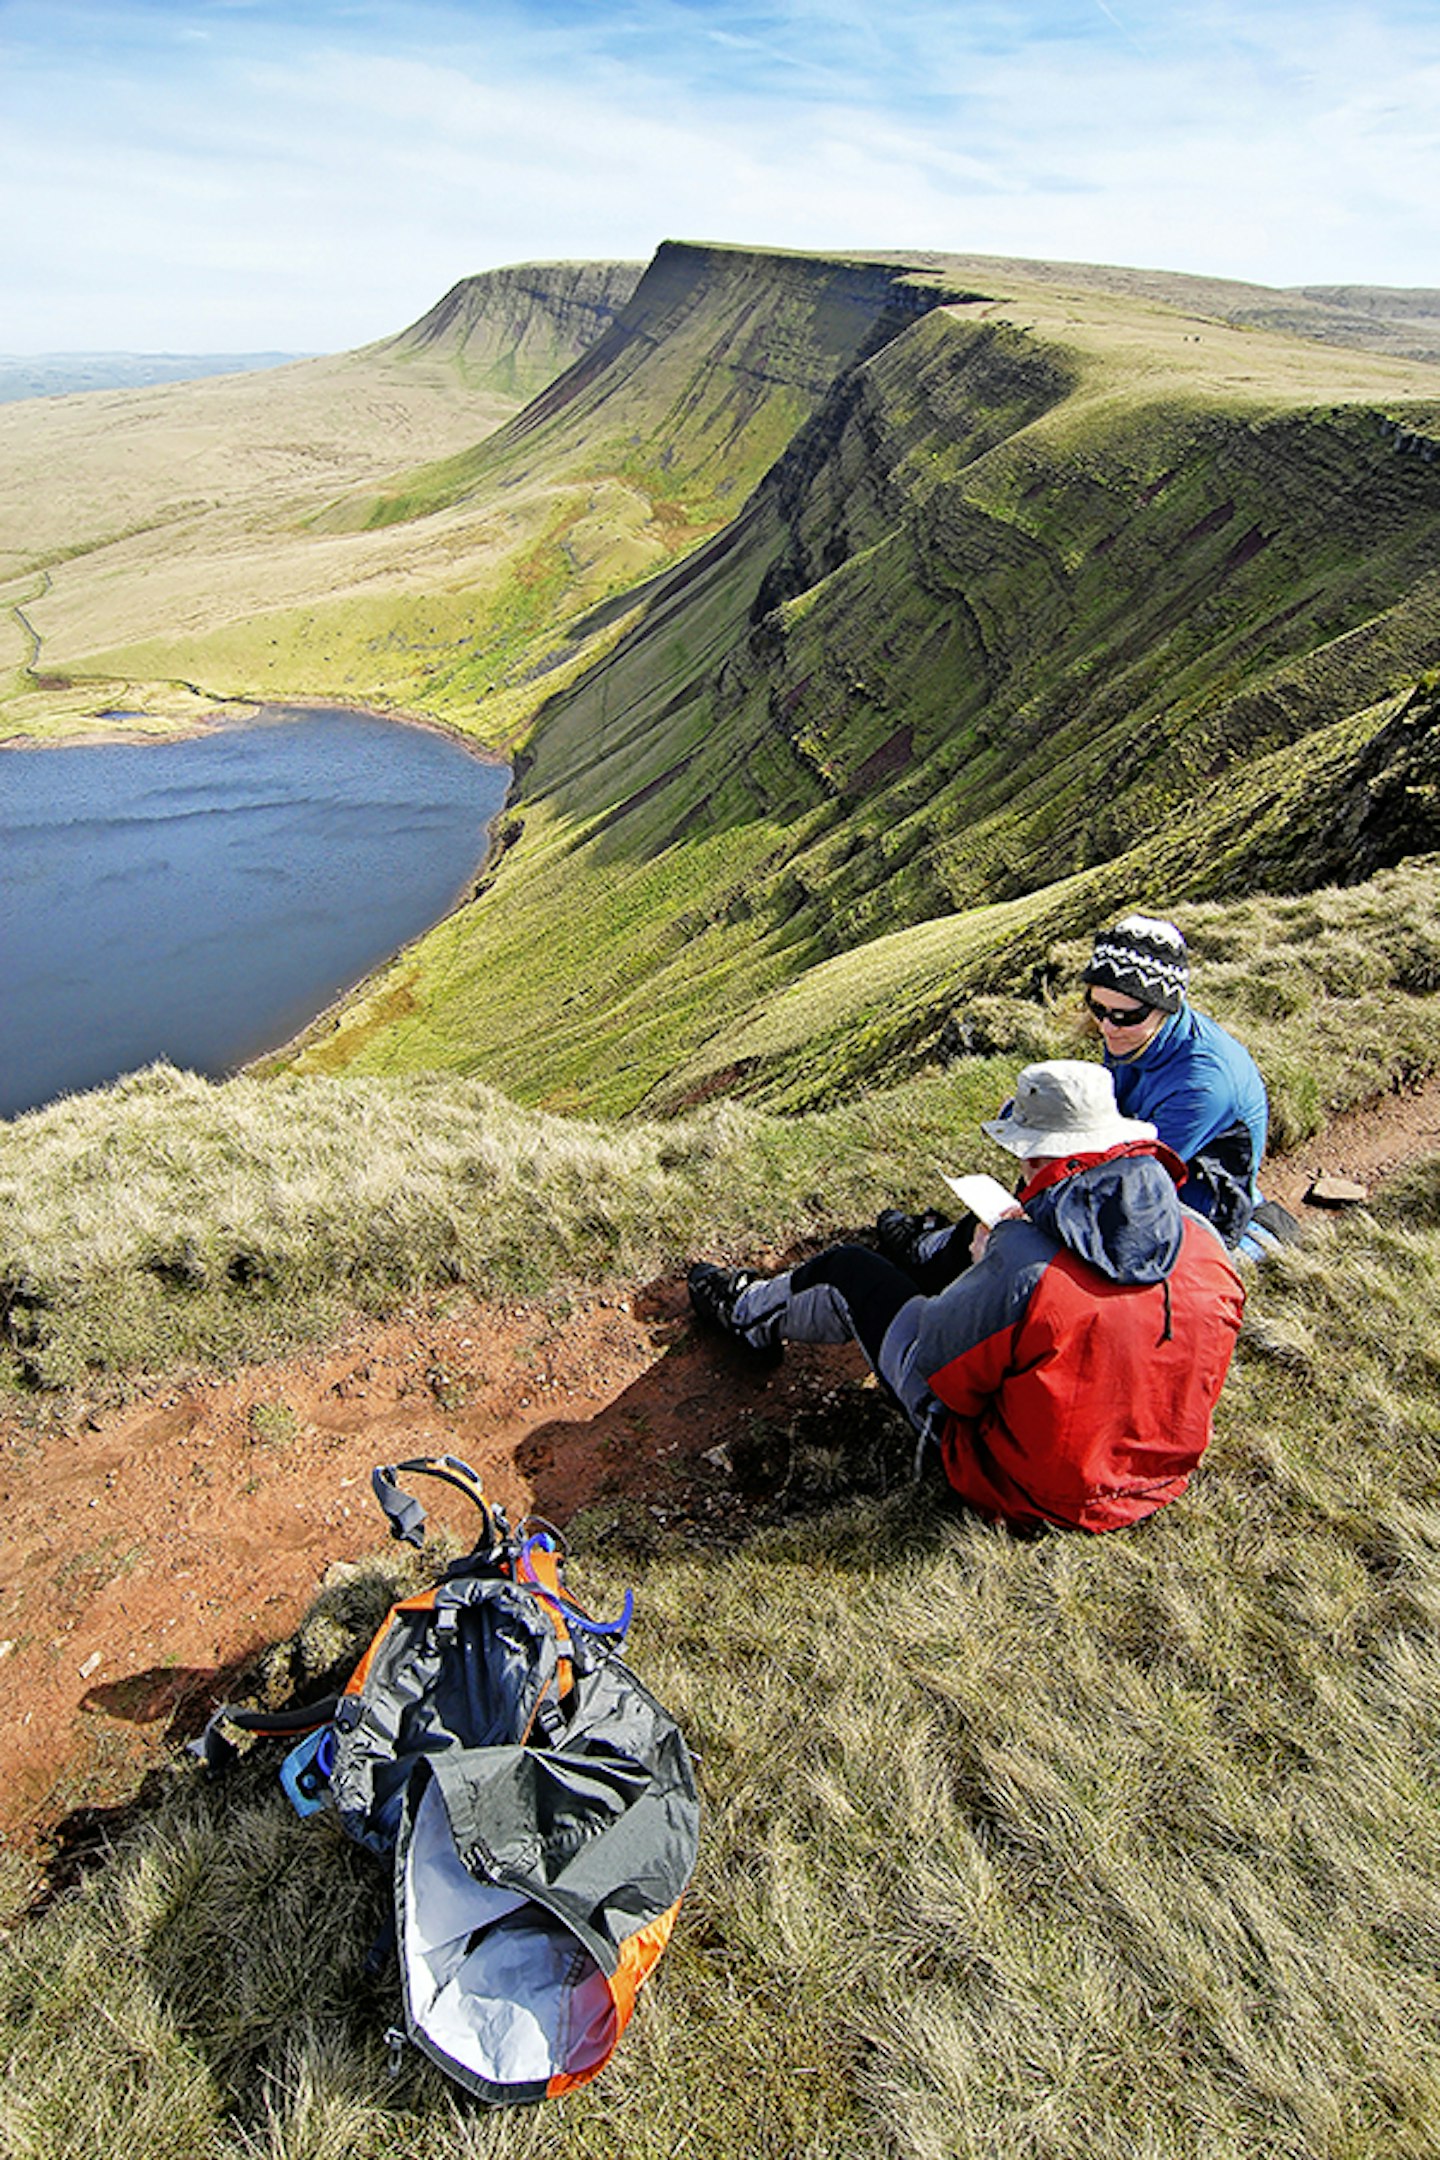 Above the edges of the Brecon Beacons